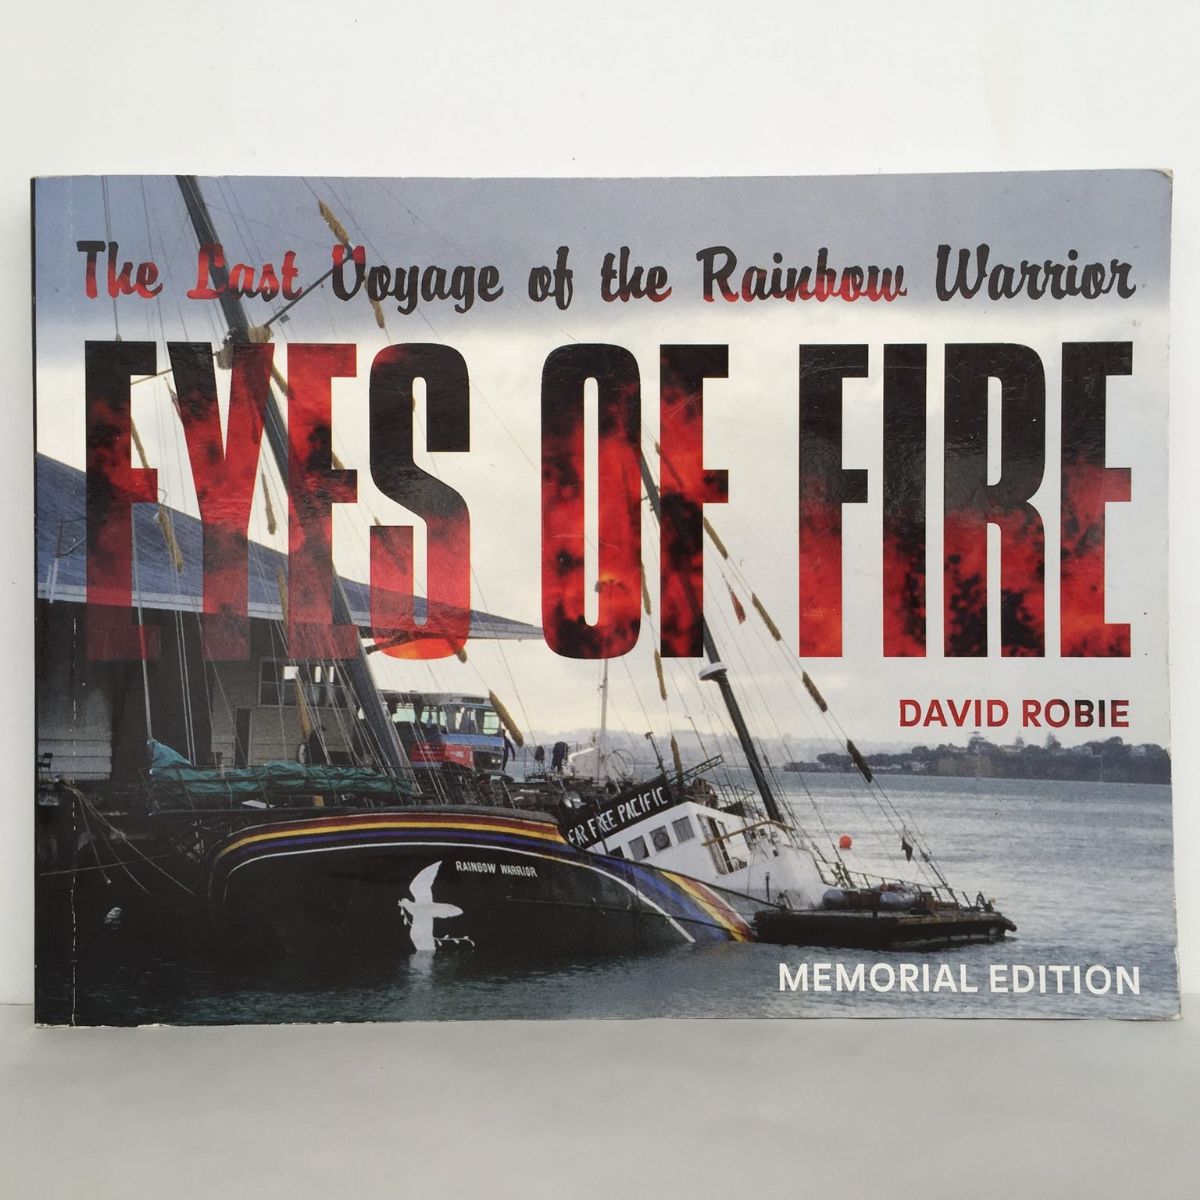 EYES OF FIRE: The Last Voyage of The Rainbow Warrior